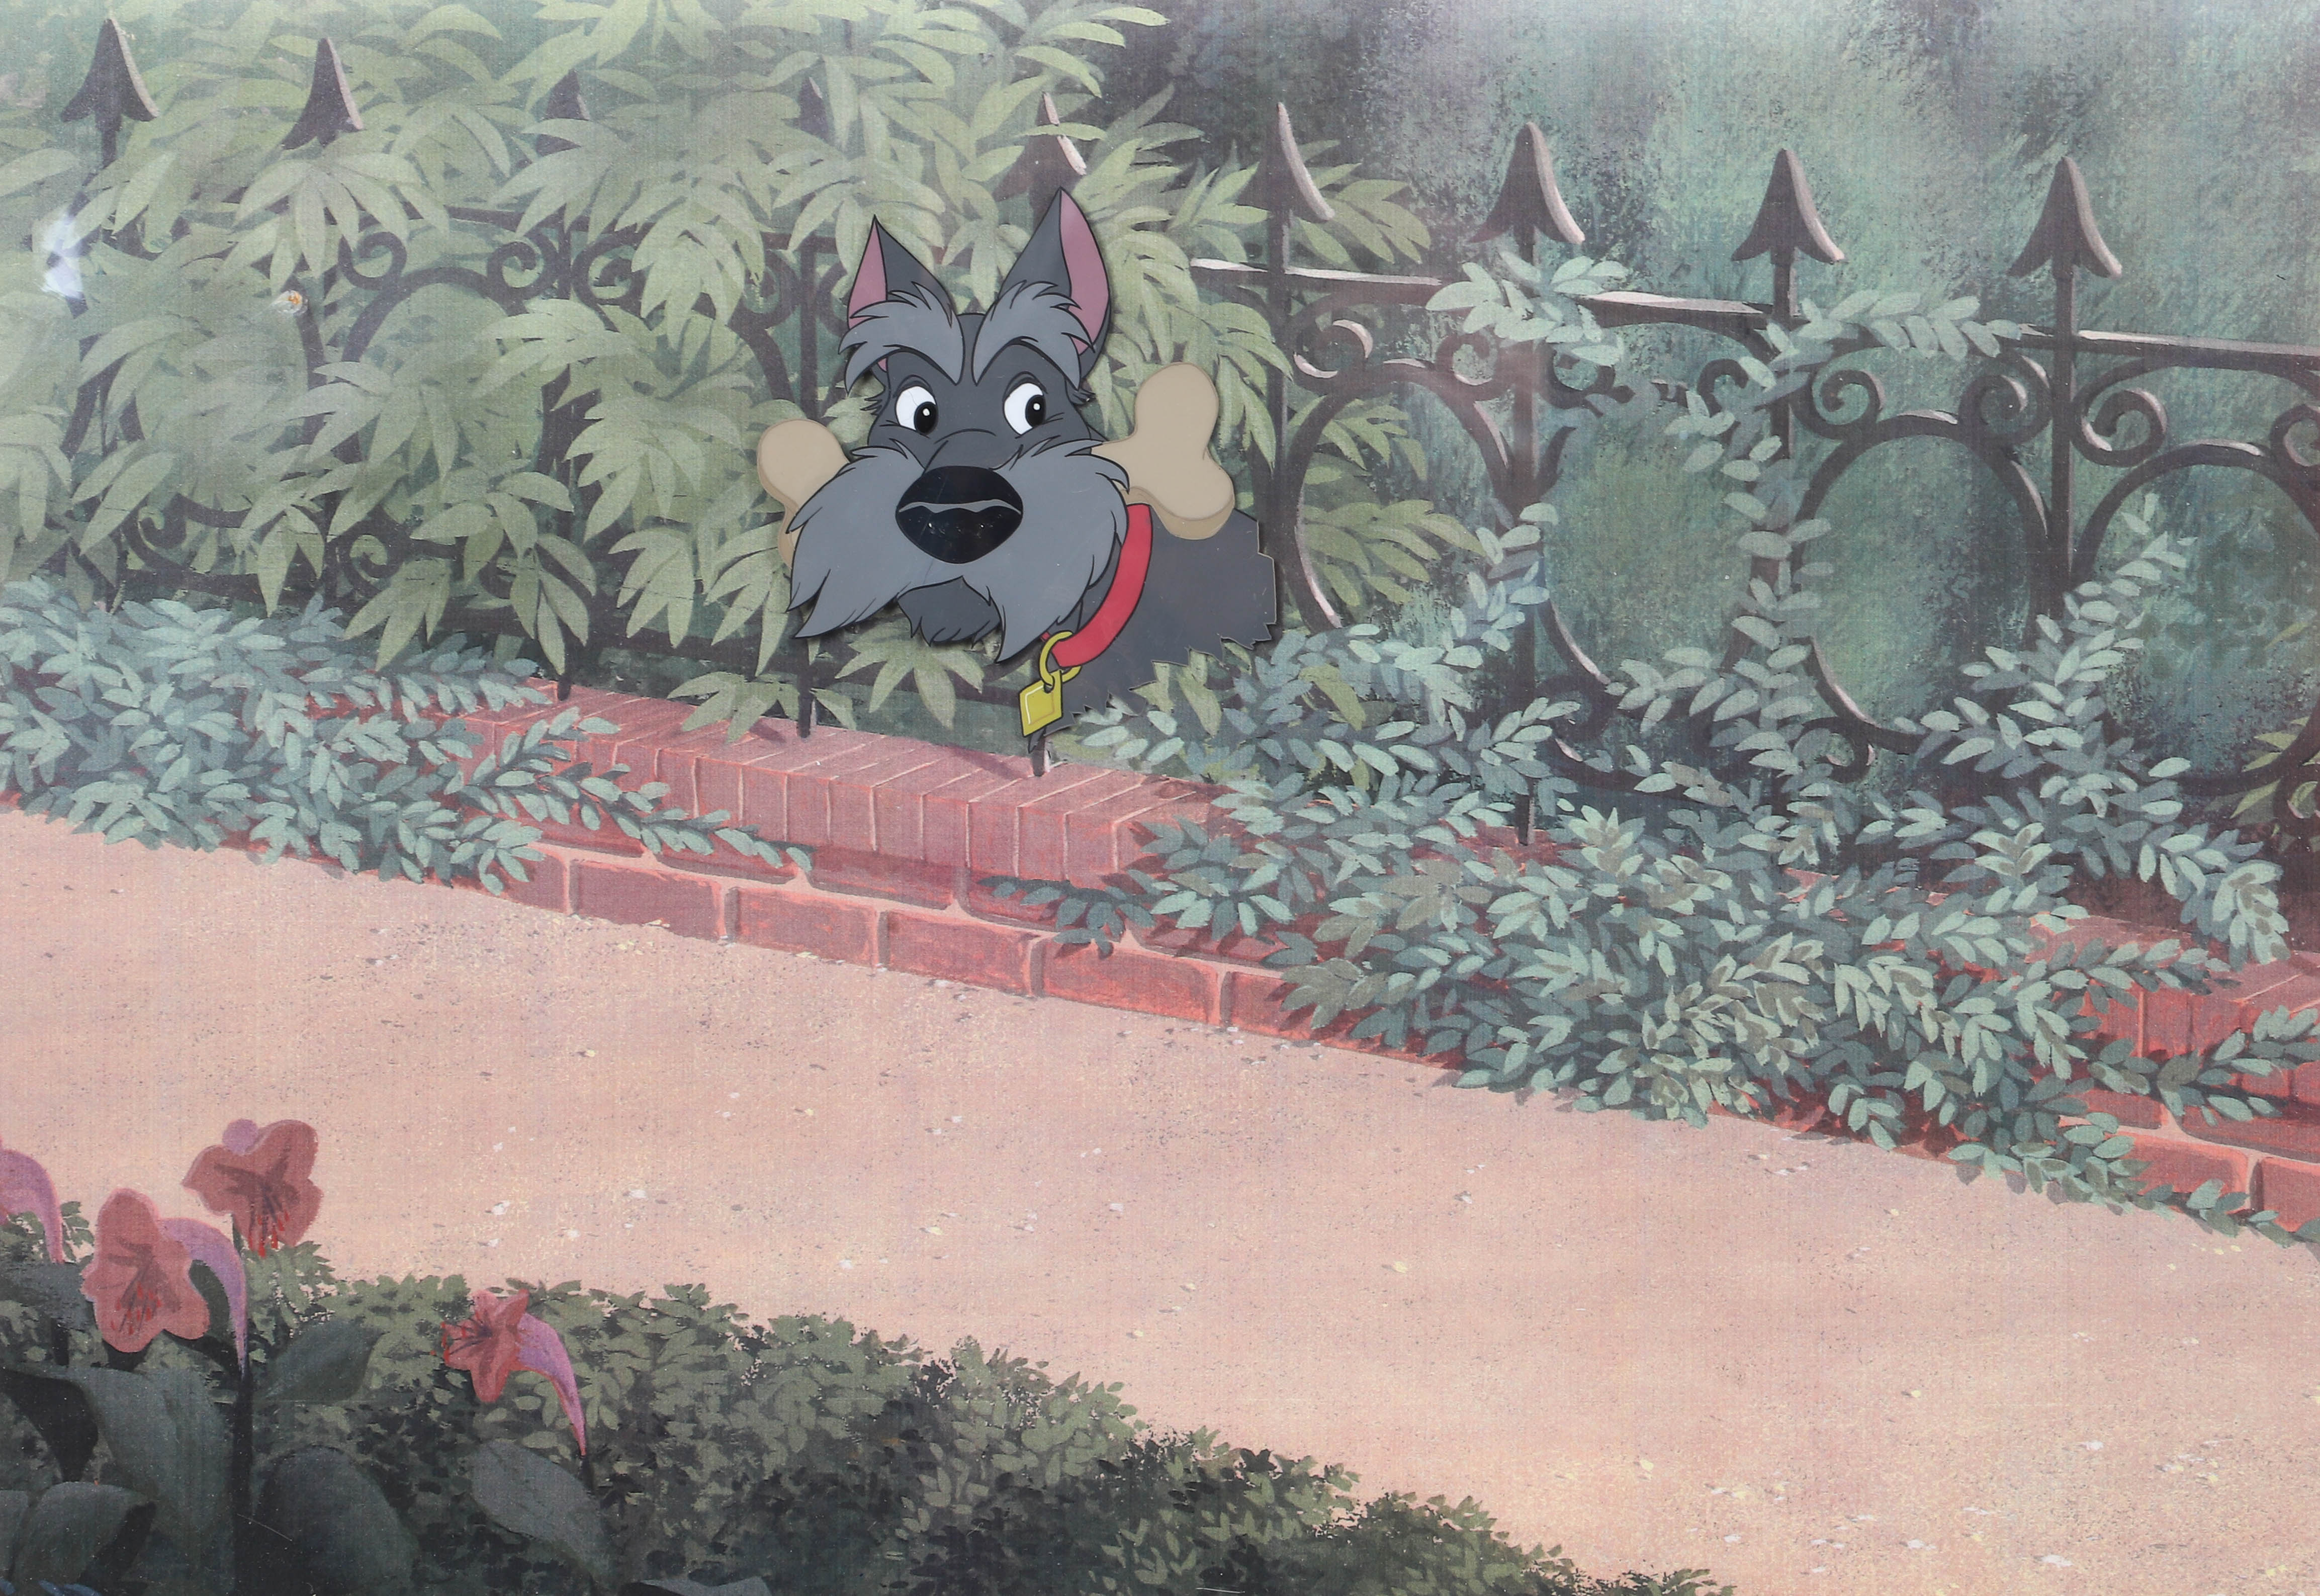 Lady and the Tramp production cel